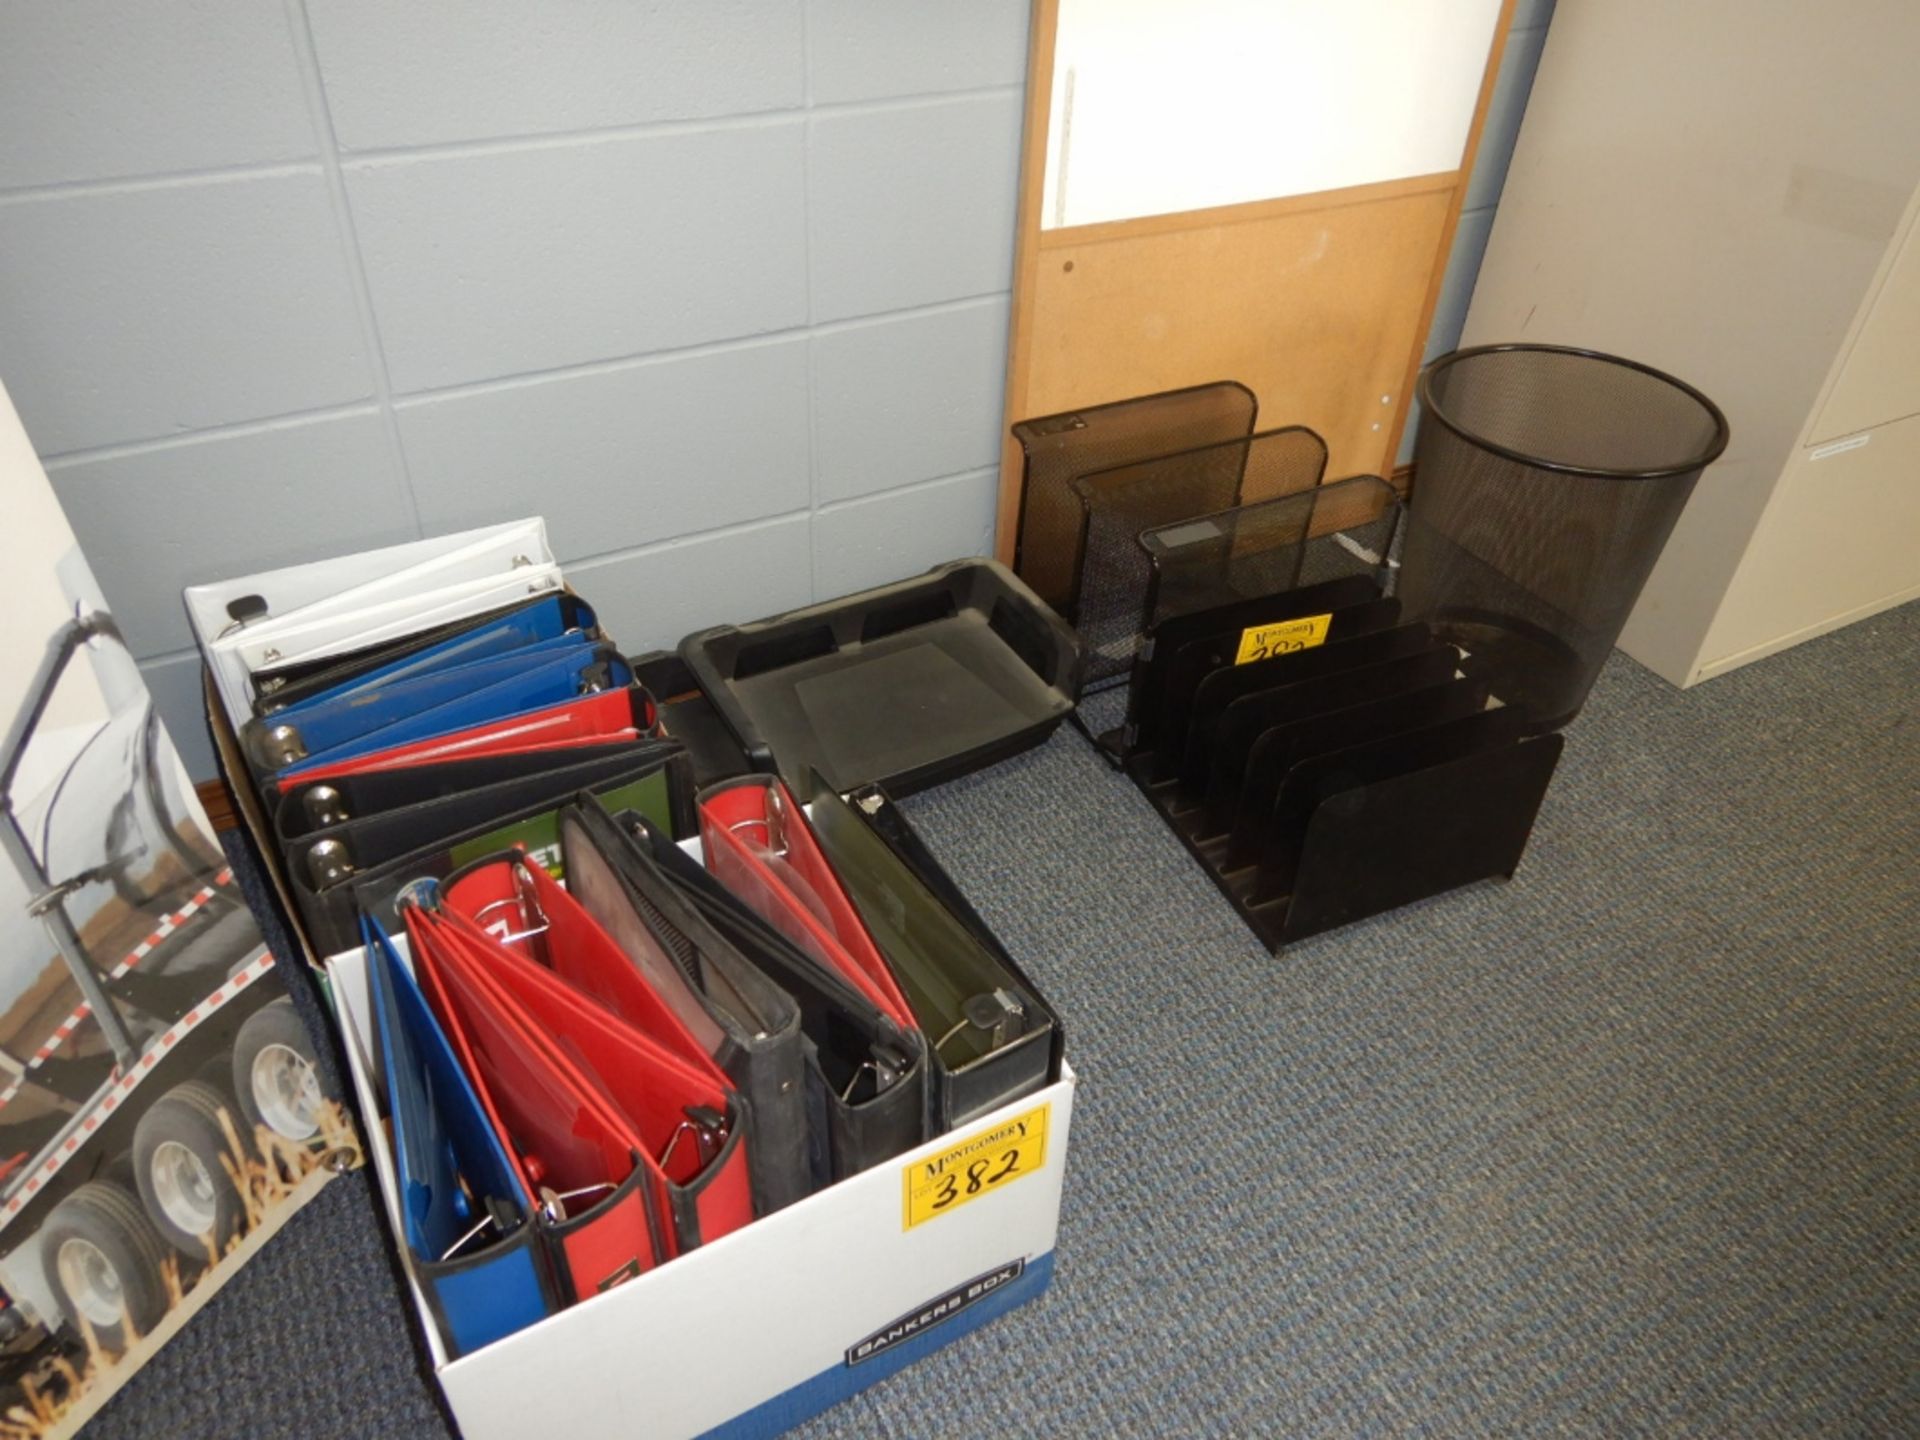 L/O MISC OFFICE SUPPLIES, BINDERS, ETC - Image 6 of 6